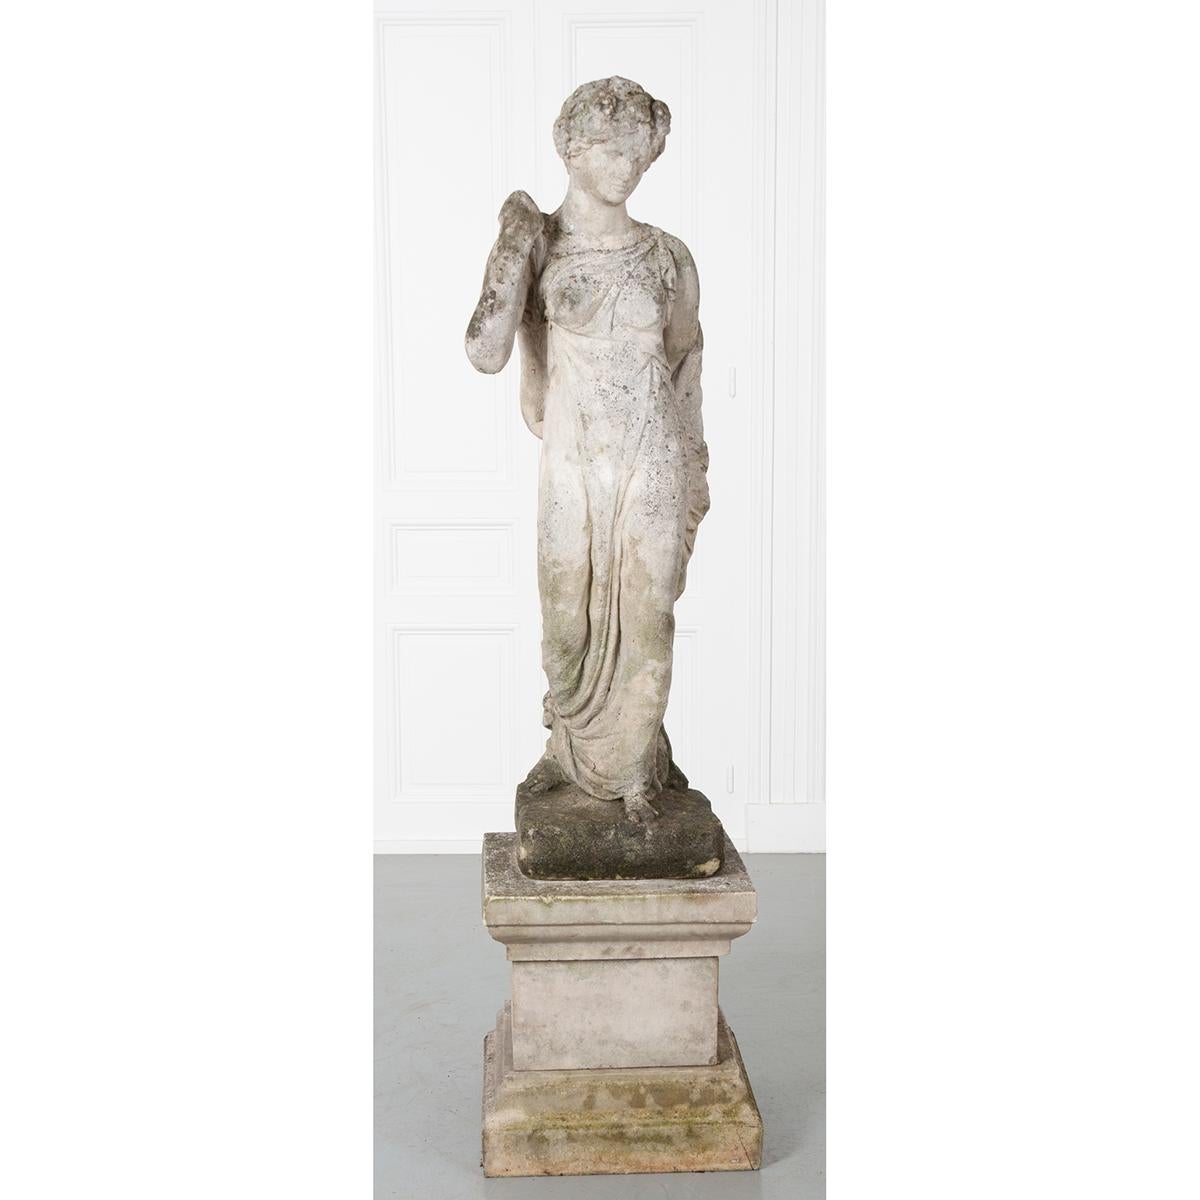 This patinated cast stone statue rests atop a pedestal that would work beautifully indoors or outdoors. It depicts a robed female with one hand tucked into her robe with the other hand over her shoulder. Peeking out from under her robe you can see